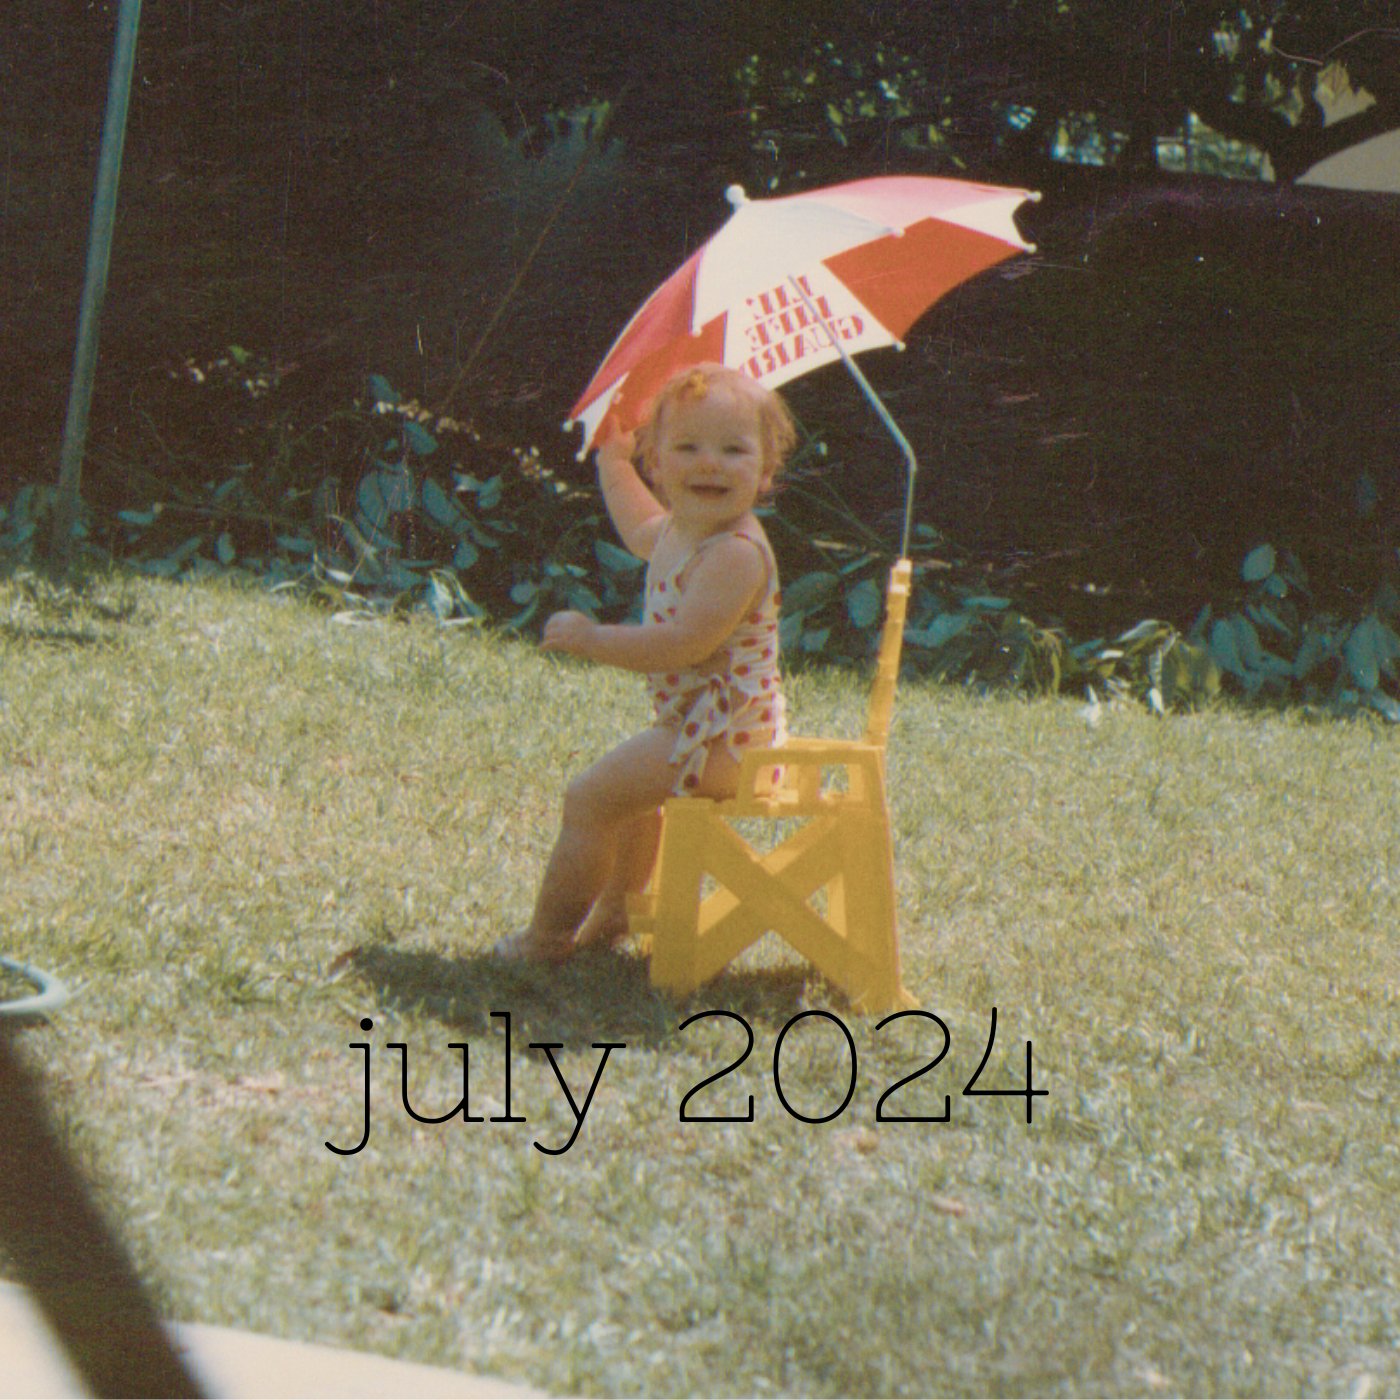 a square image of a kid anywhere from age two to four tbh with short reddish hair wearing a red and white polka dot bathing suit and sitting in a yellow toy lifeguard chair under a red and white umbrella